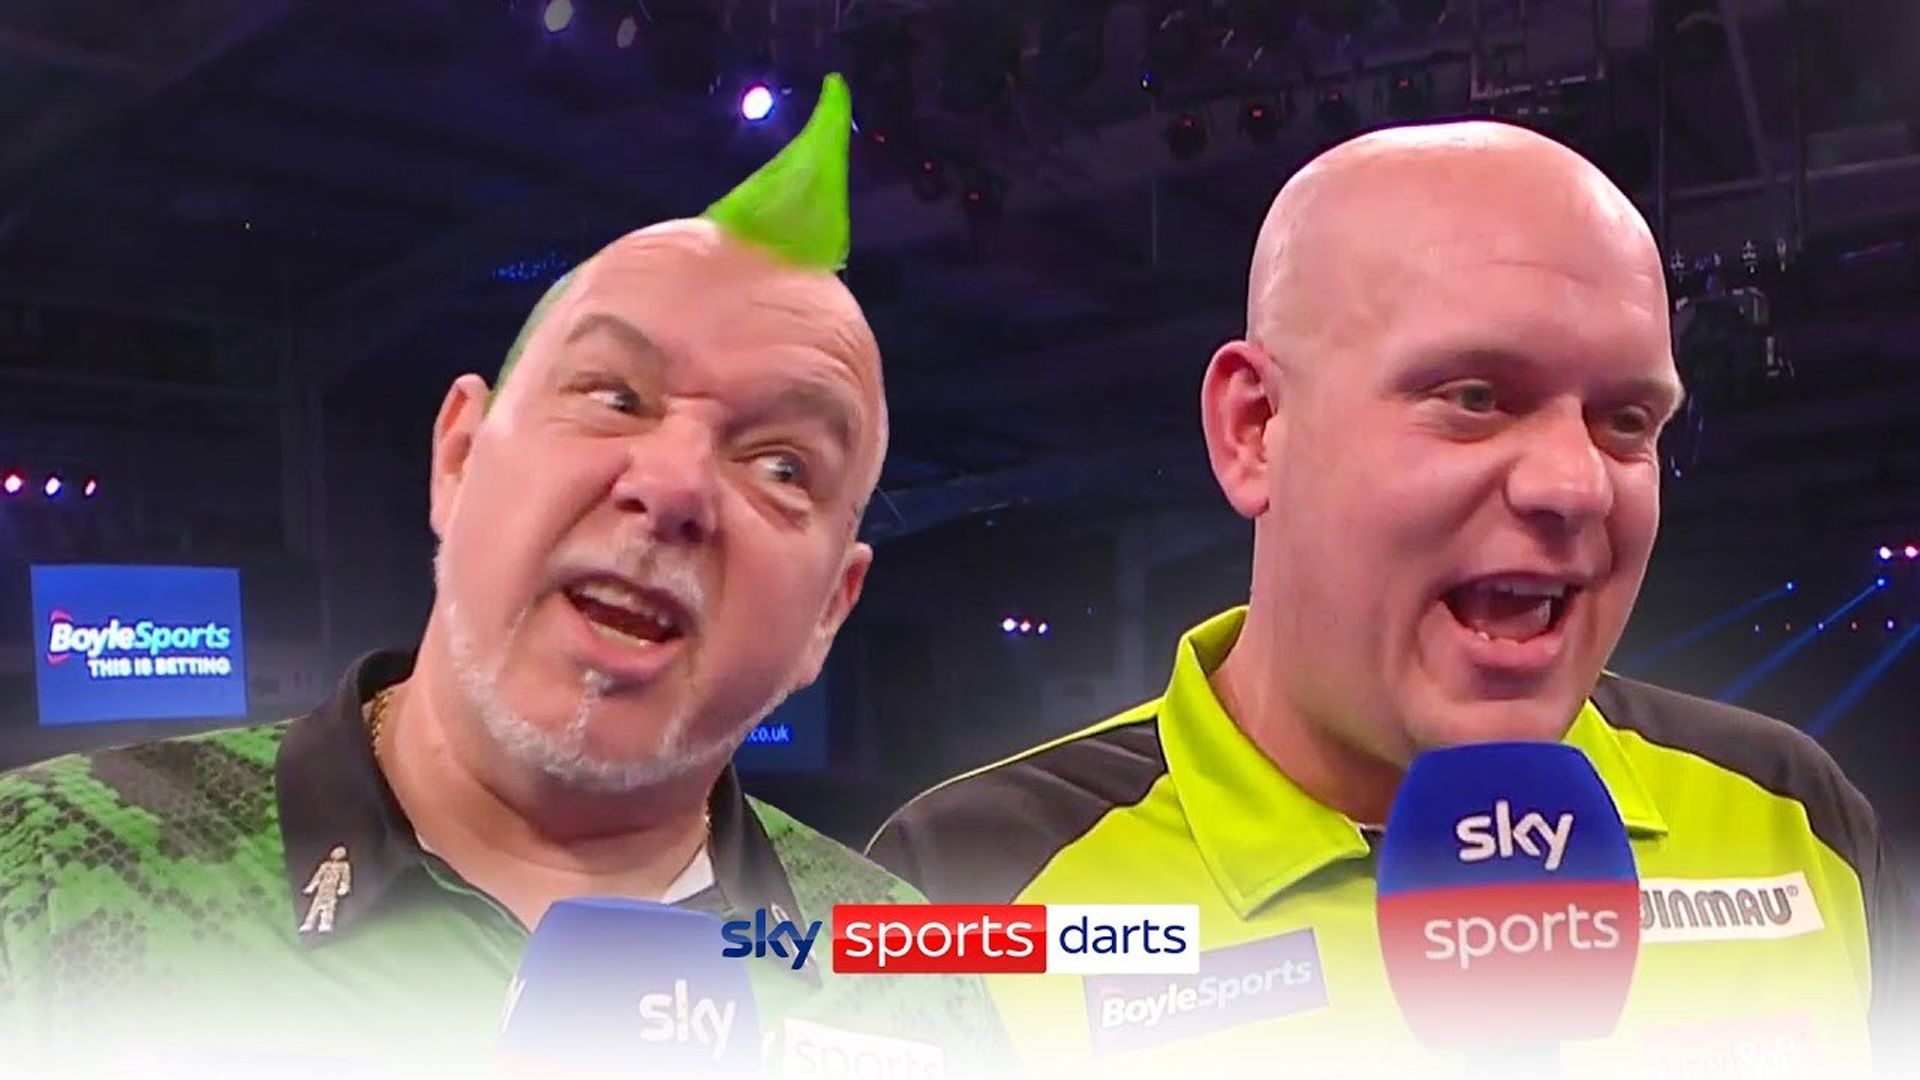 Wright calls out MVG for 'mediocre game'... MVG responds!